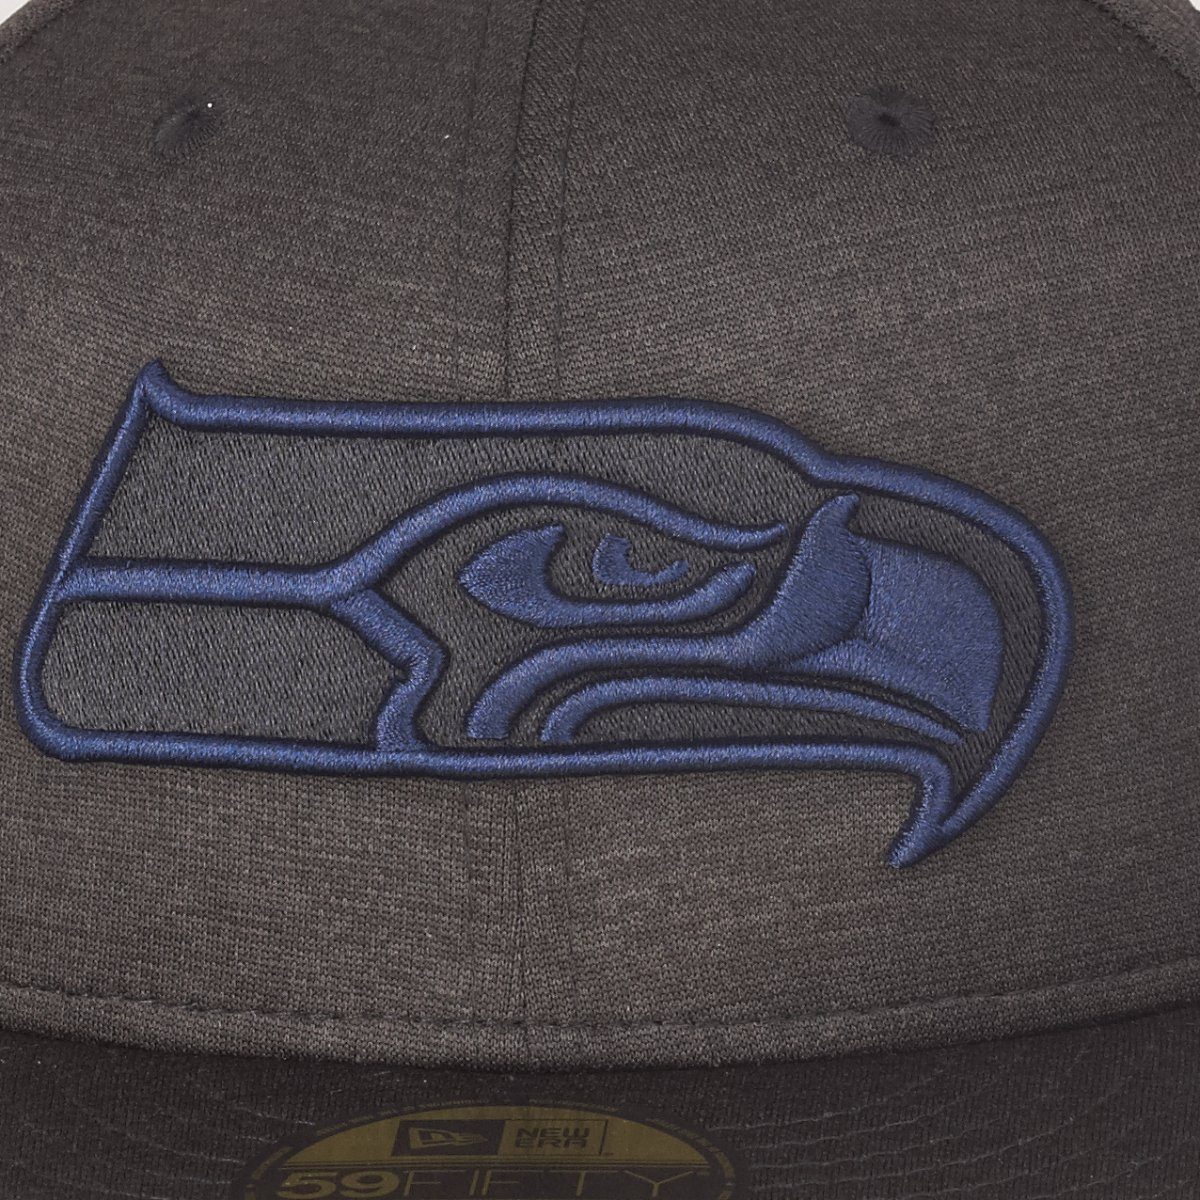 New Era NFL Seahawks 59Fifty SHADOW Cap Seattle TECH Fitted